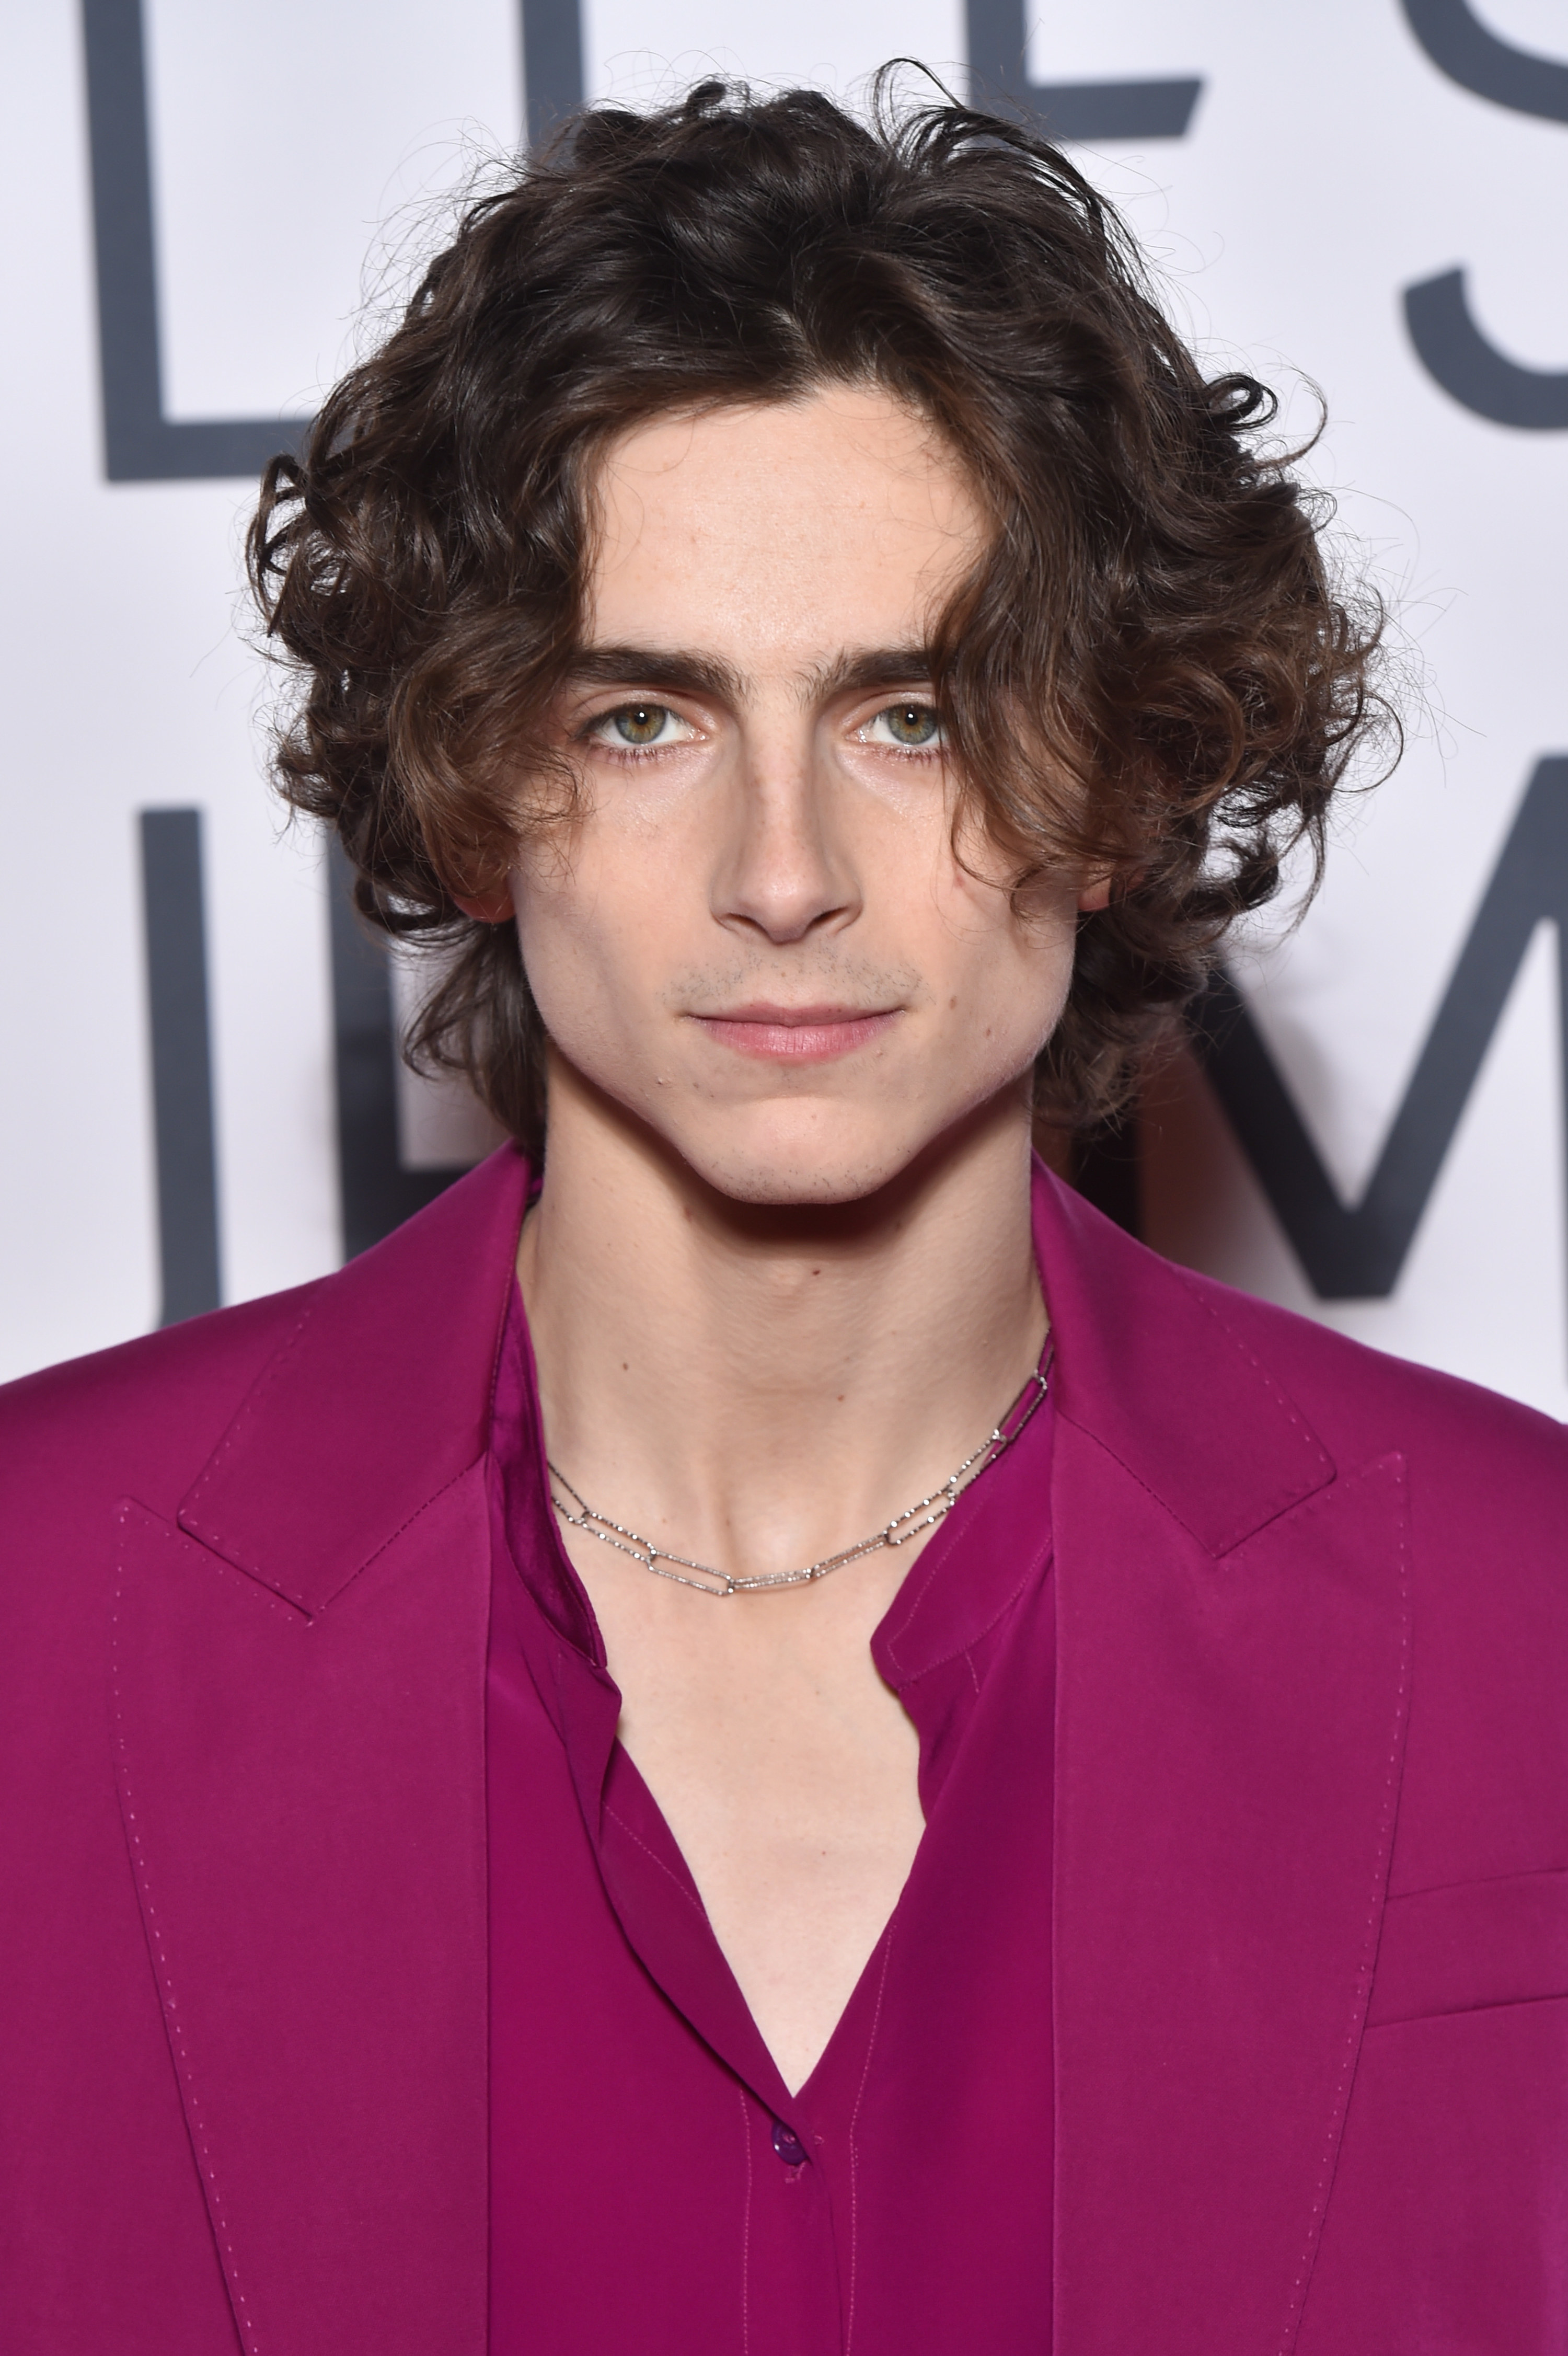 Timmy in a dark-pink-ish suit